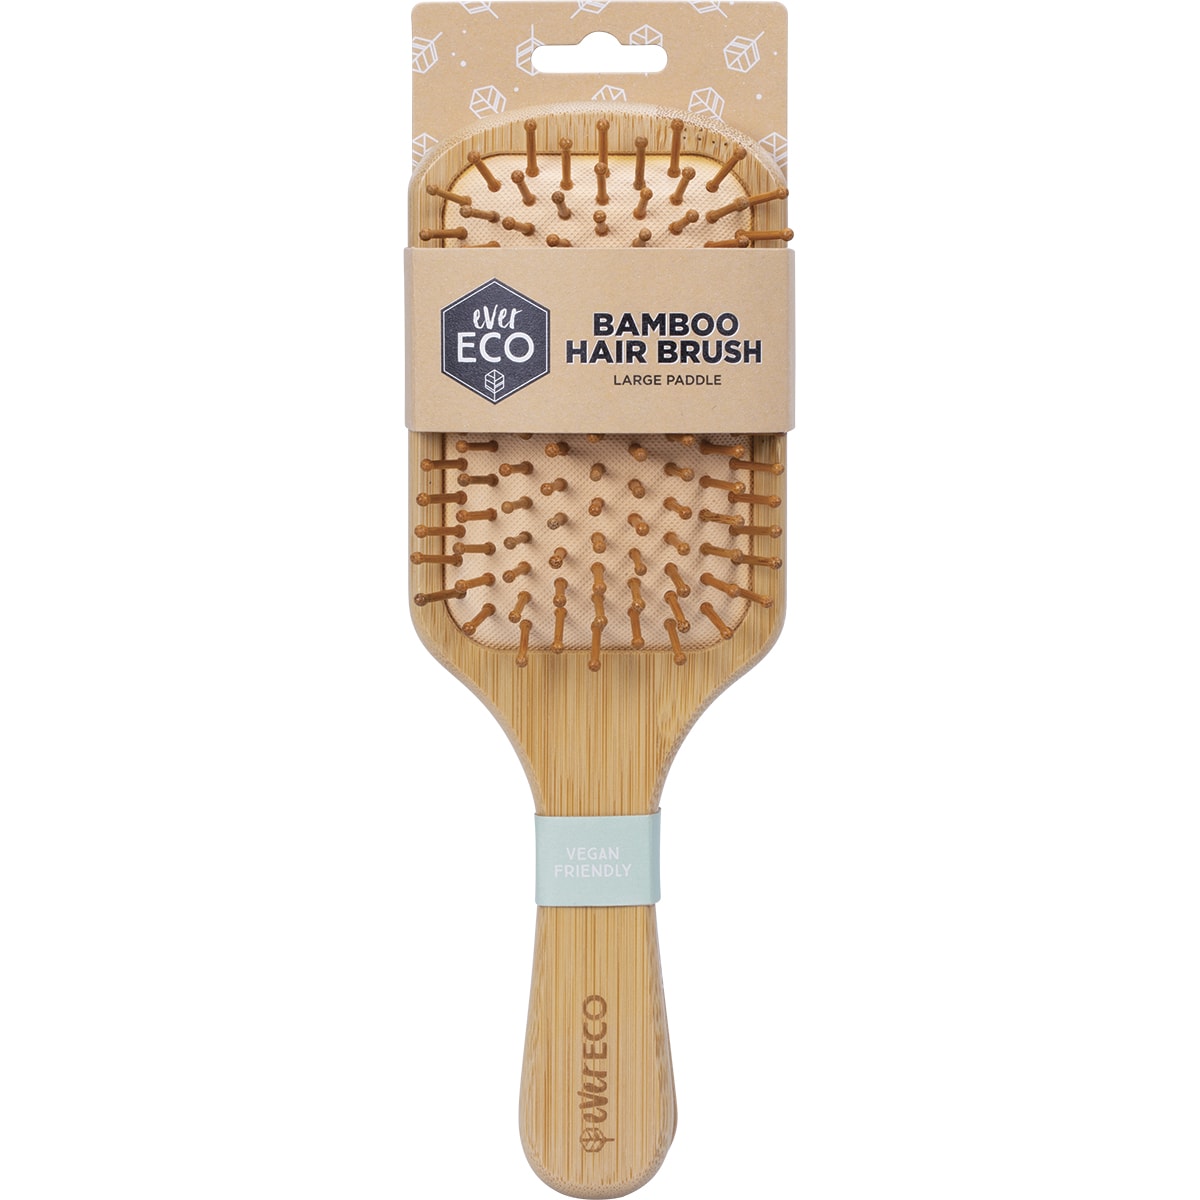 Ever Eco large paddle bamboo hair brush with packaging